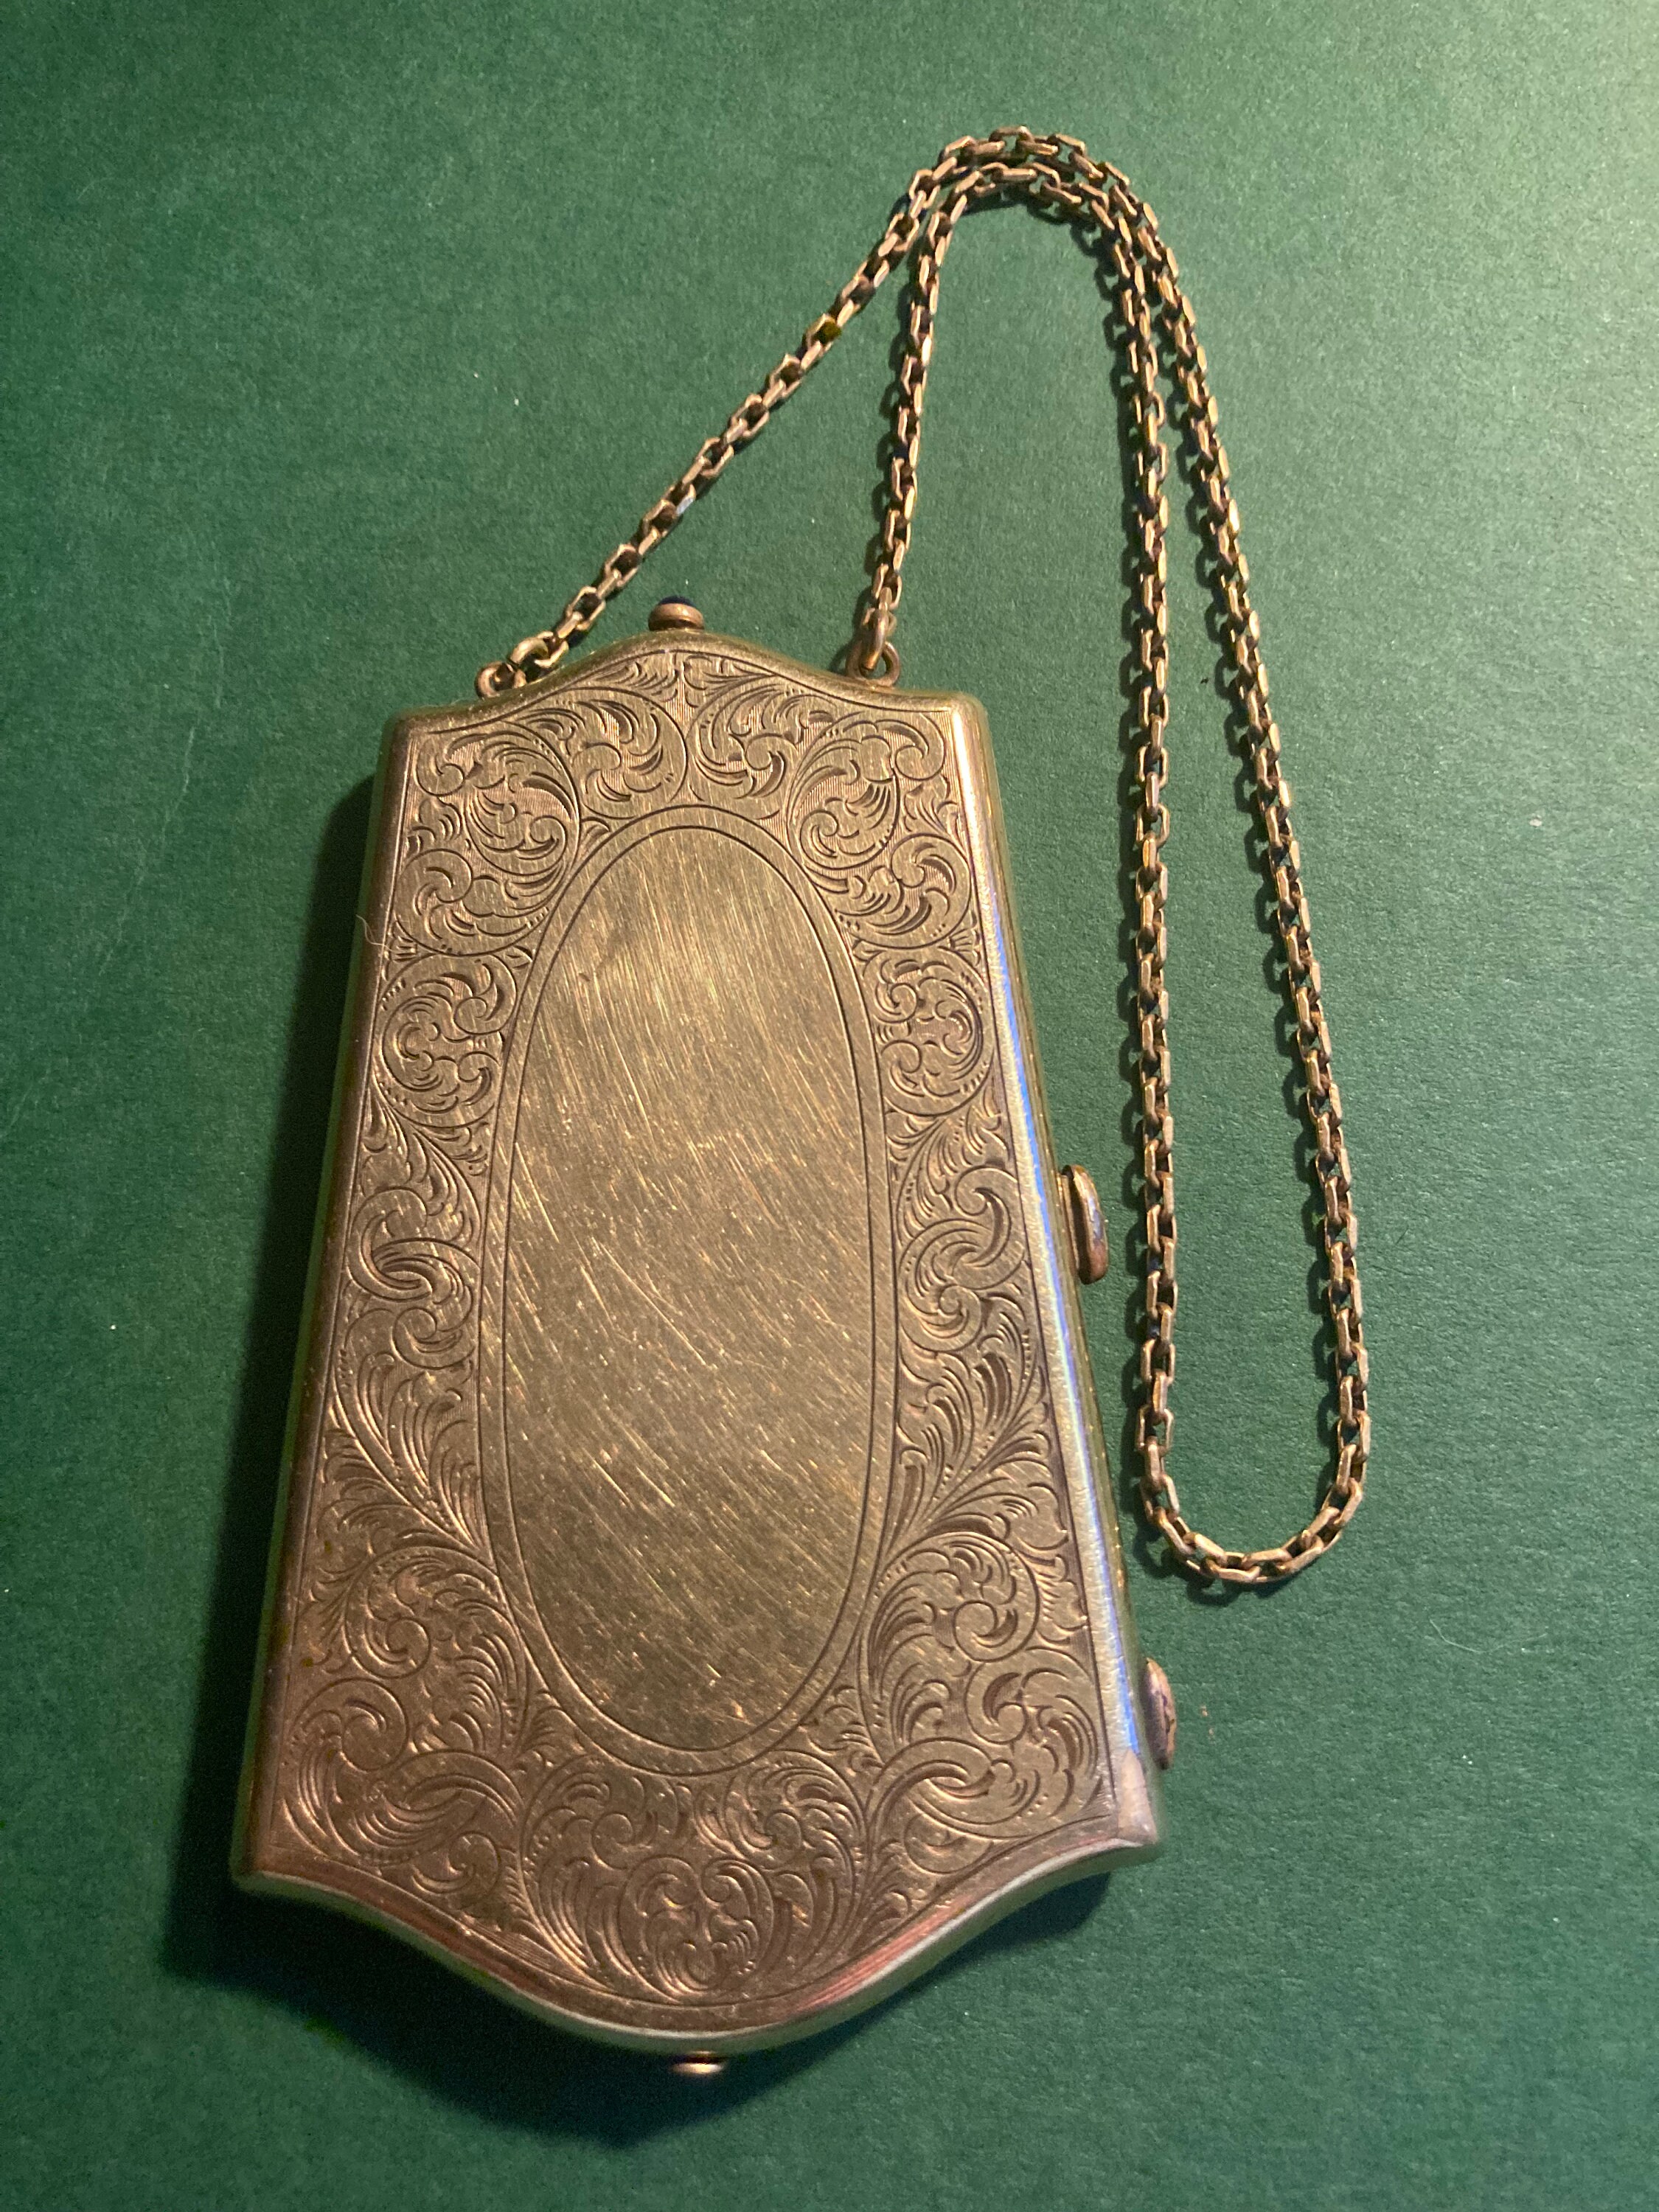 Antique 14KT Gold Compact and Lipstick Holder Set and a 14KT Scent Bottle  (Lot 2131 - Estate Jewelry & FashionNov 21, 2018, 6:00pm)